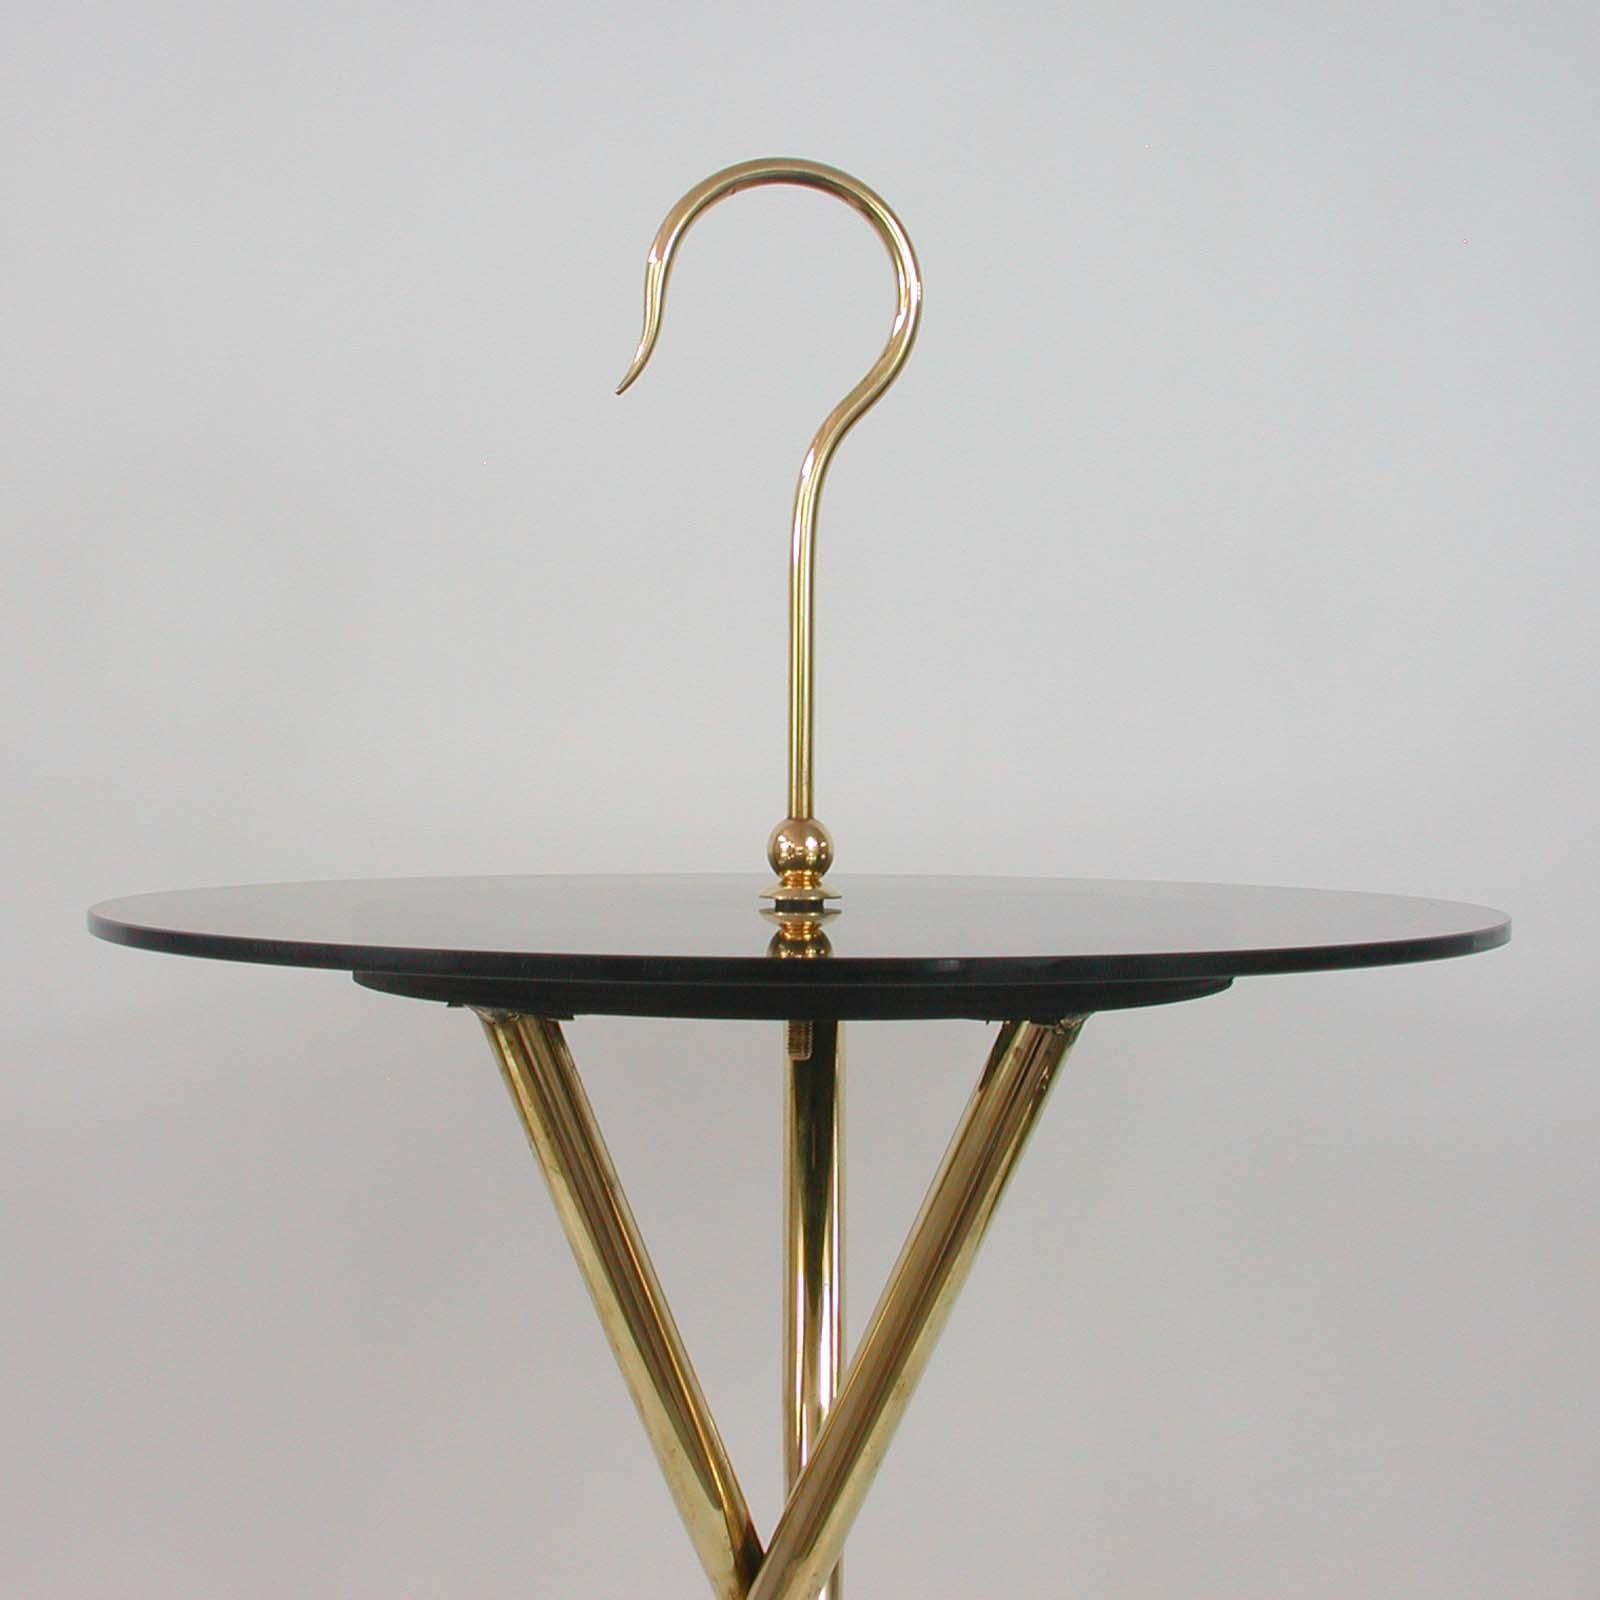 Italian Midcentury Brass and Tinted Glass Occasional Table, 1950s For Sale 2